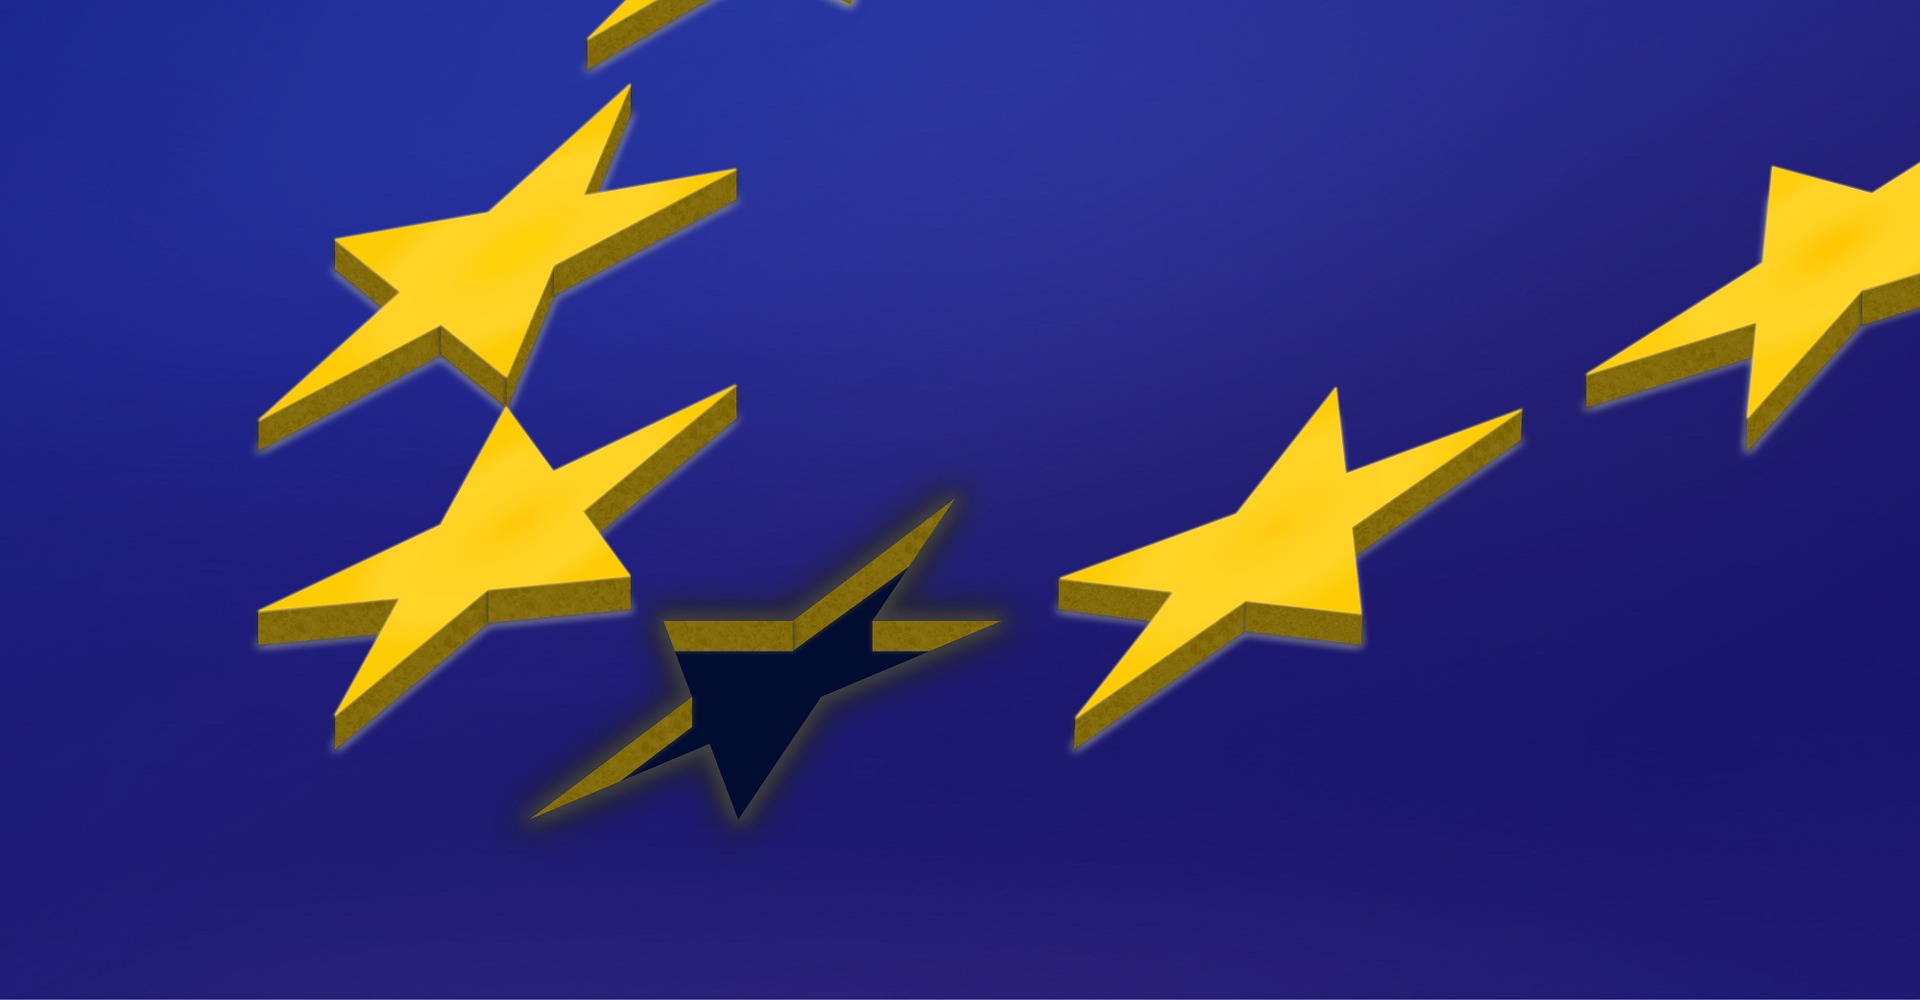 An image of the European Union flag with one star coloured black instead of gold